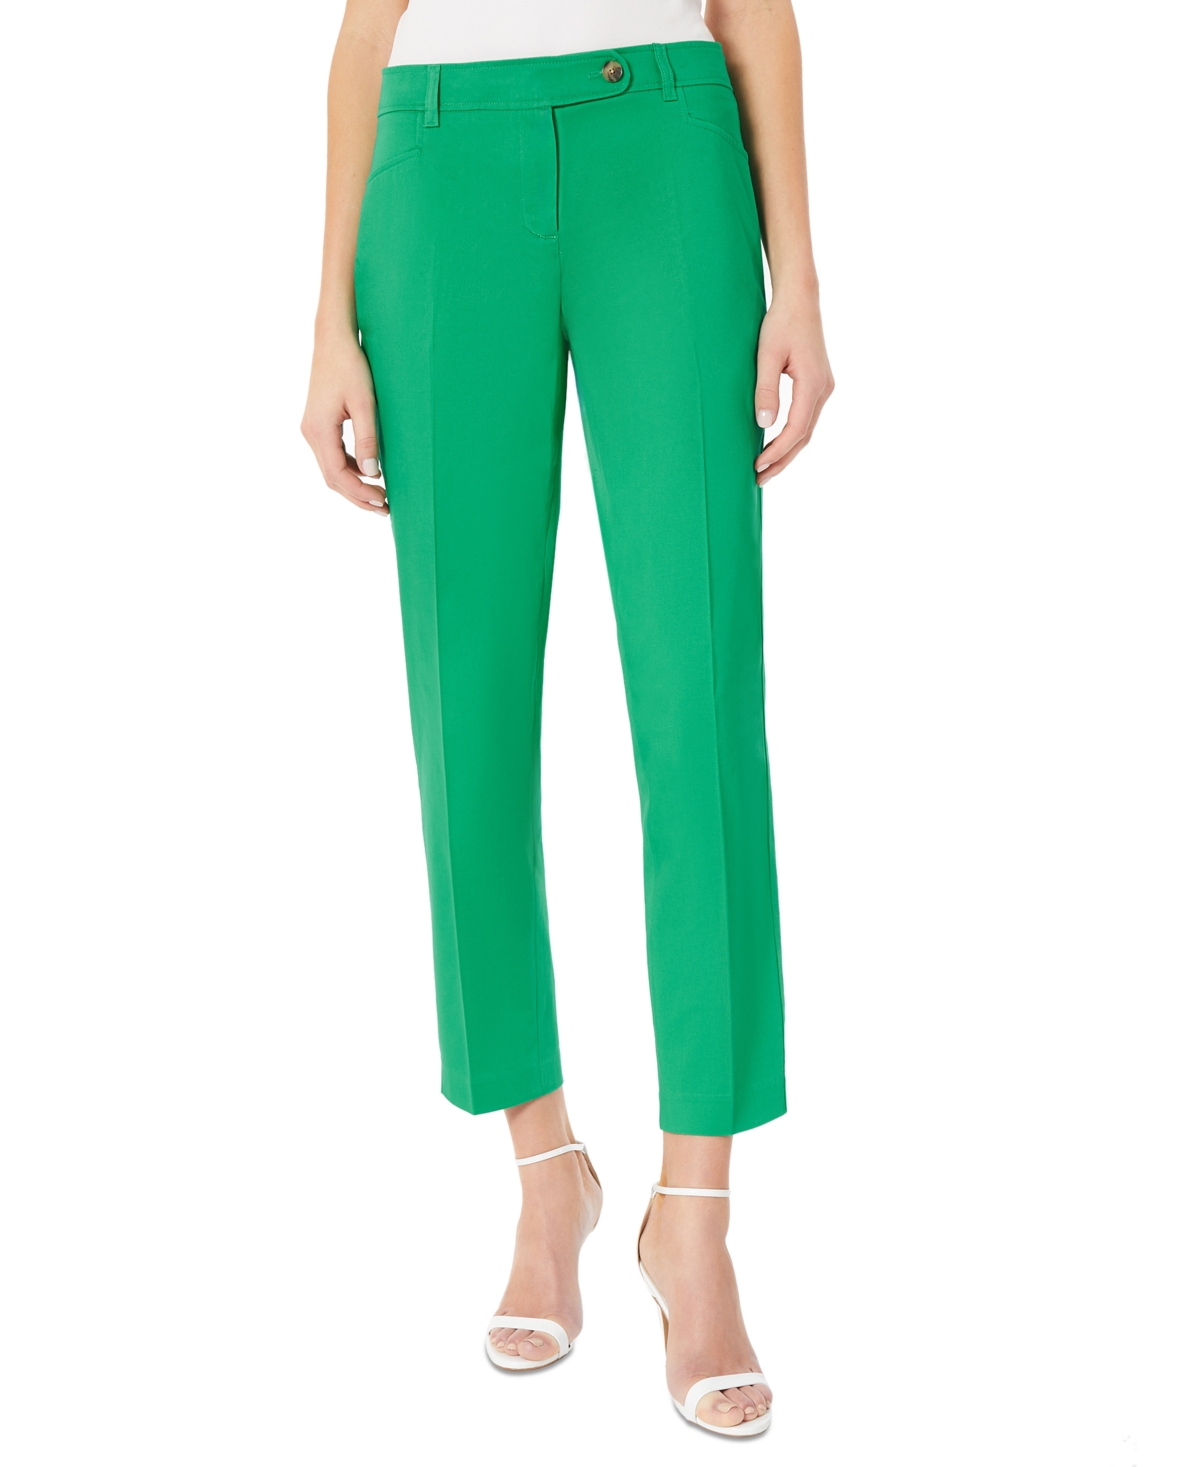 Women's Mid Rise Ankle Pants - Kelly Green